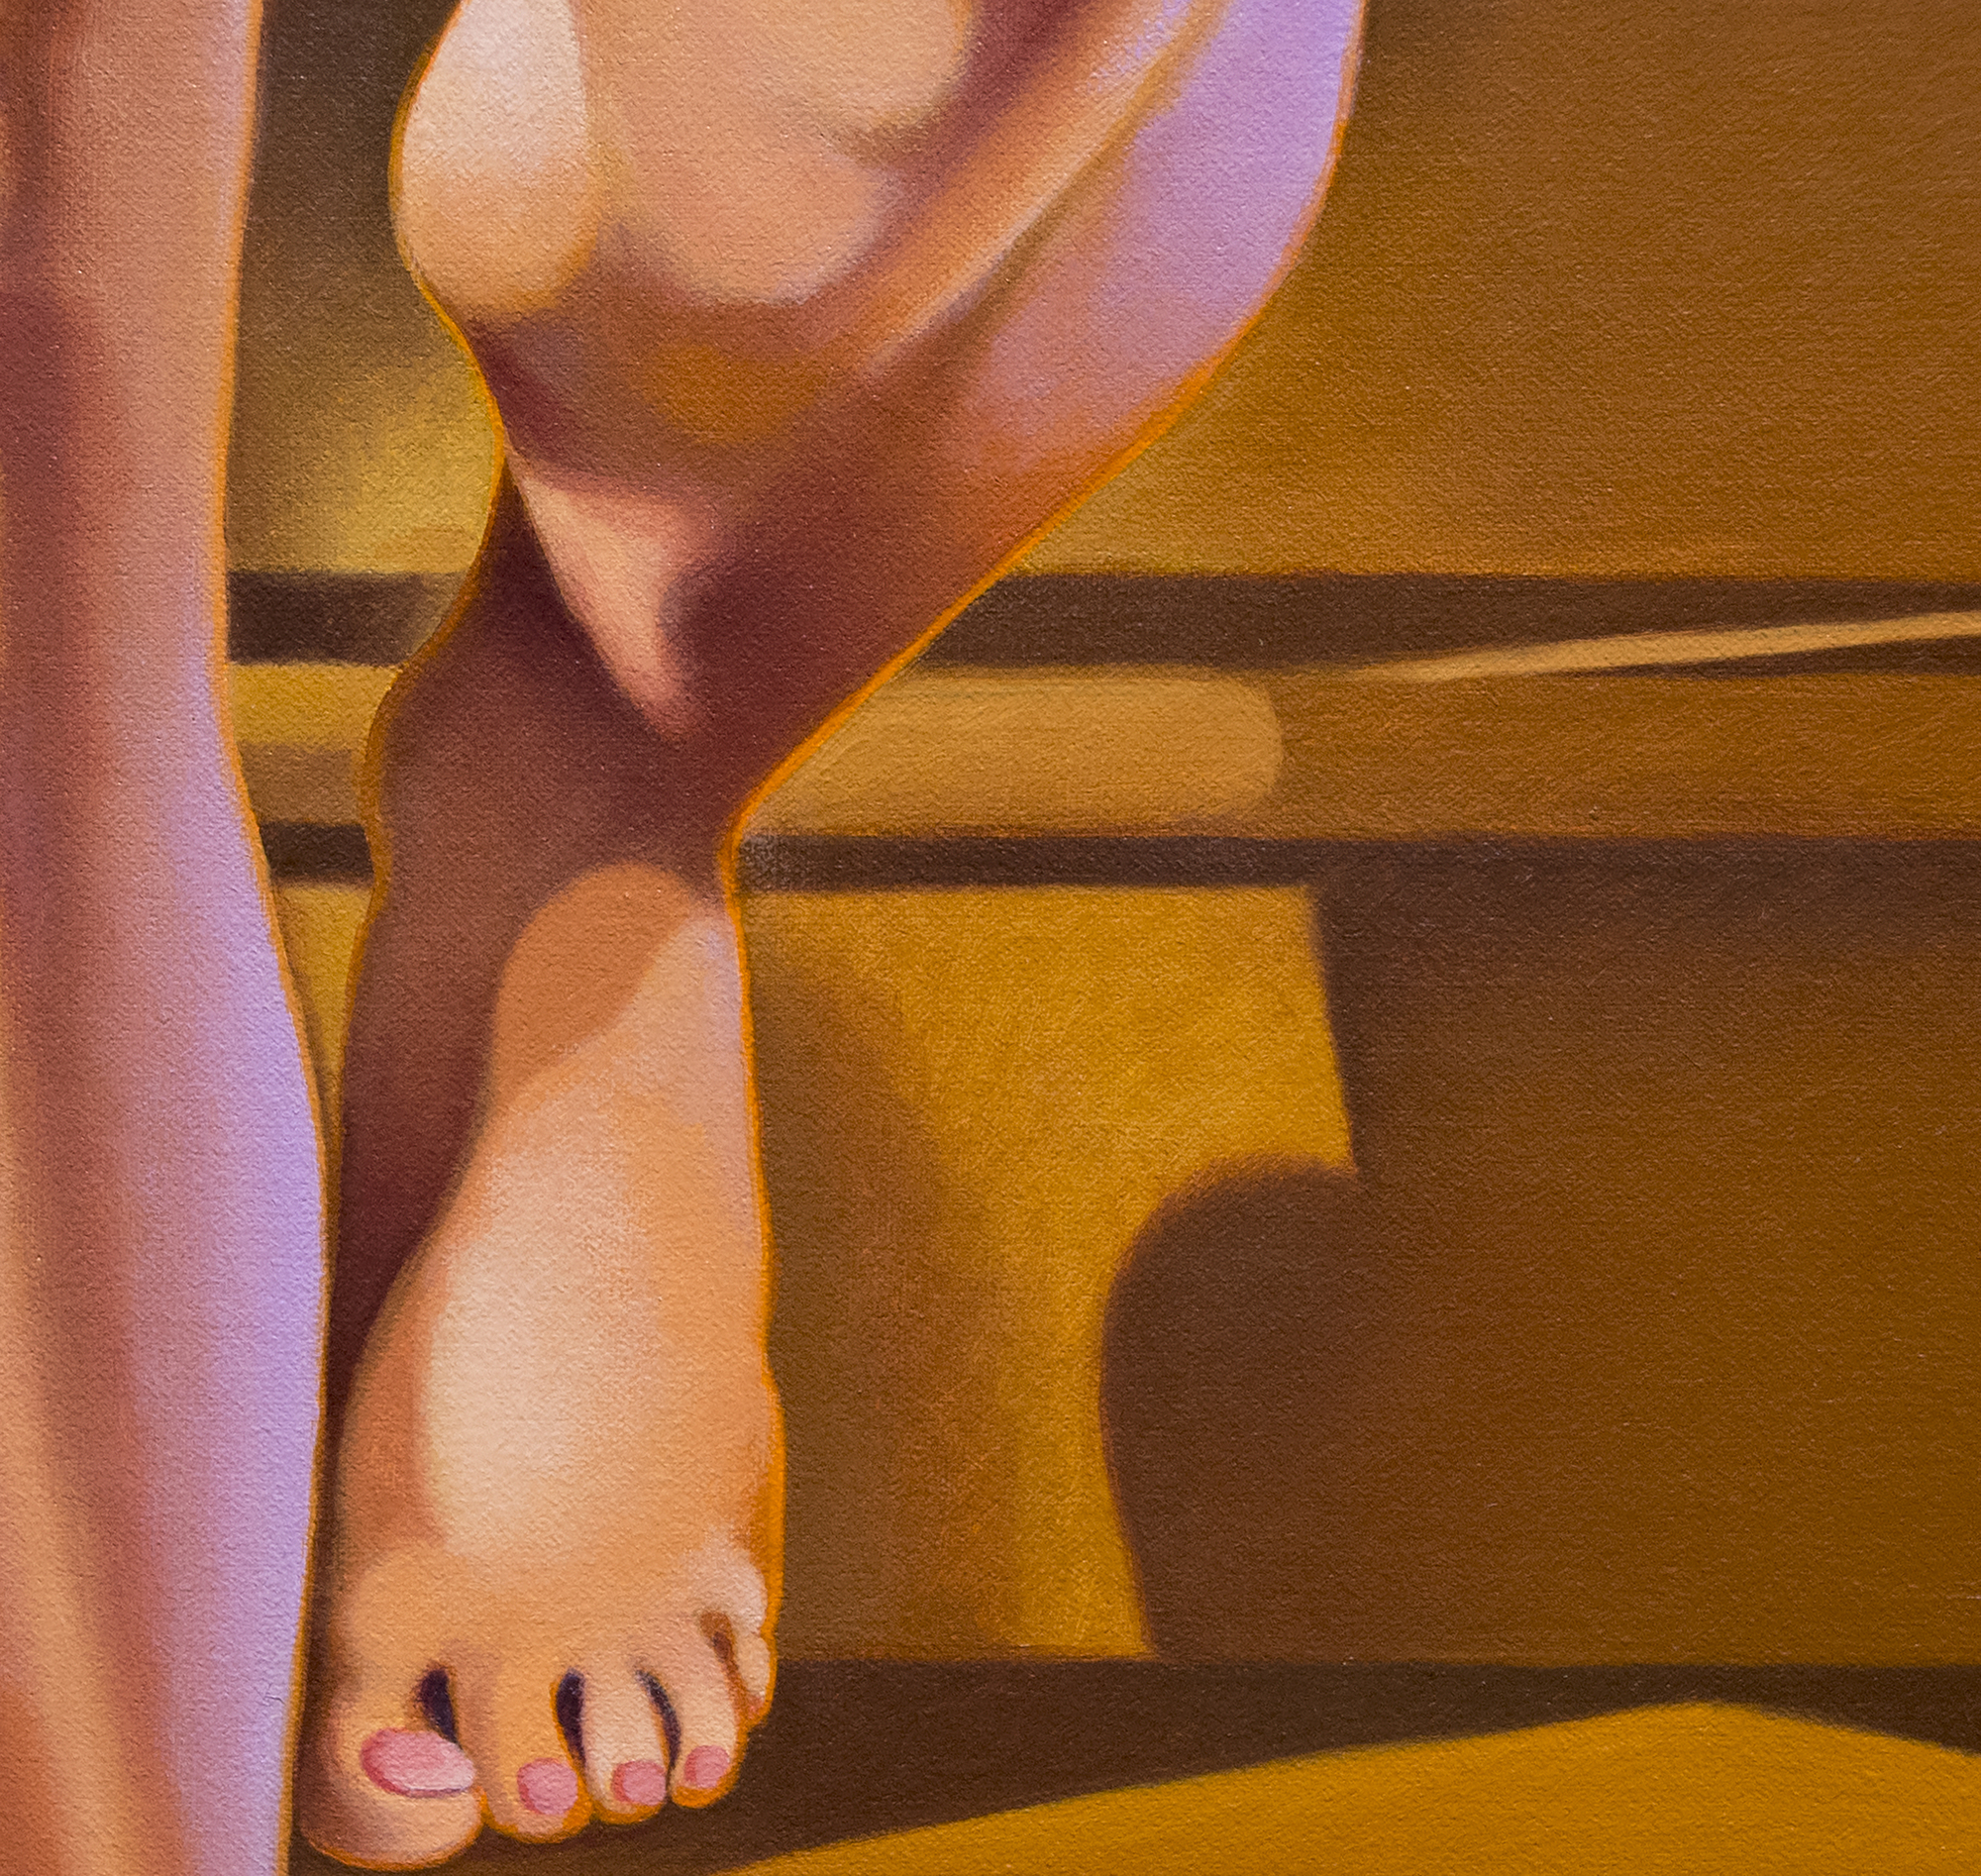 MEL RAMOS - Nude Descending a Staircase #2 - oil on canvas - 70 x 52 1/8 in.